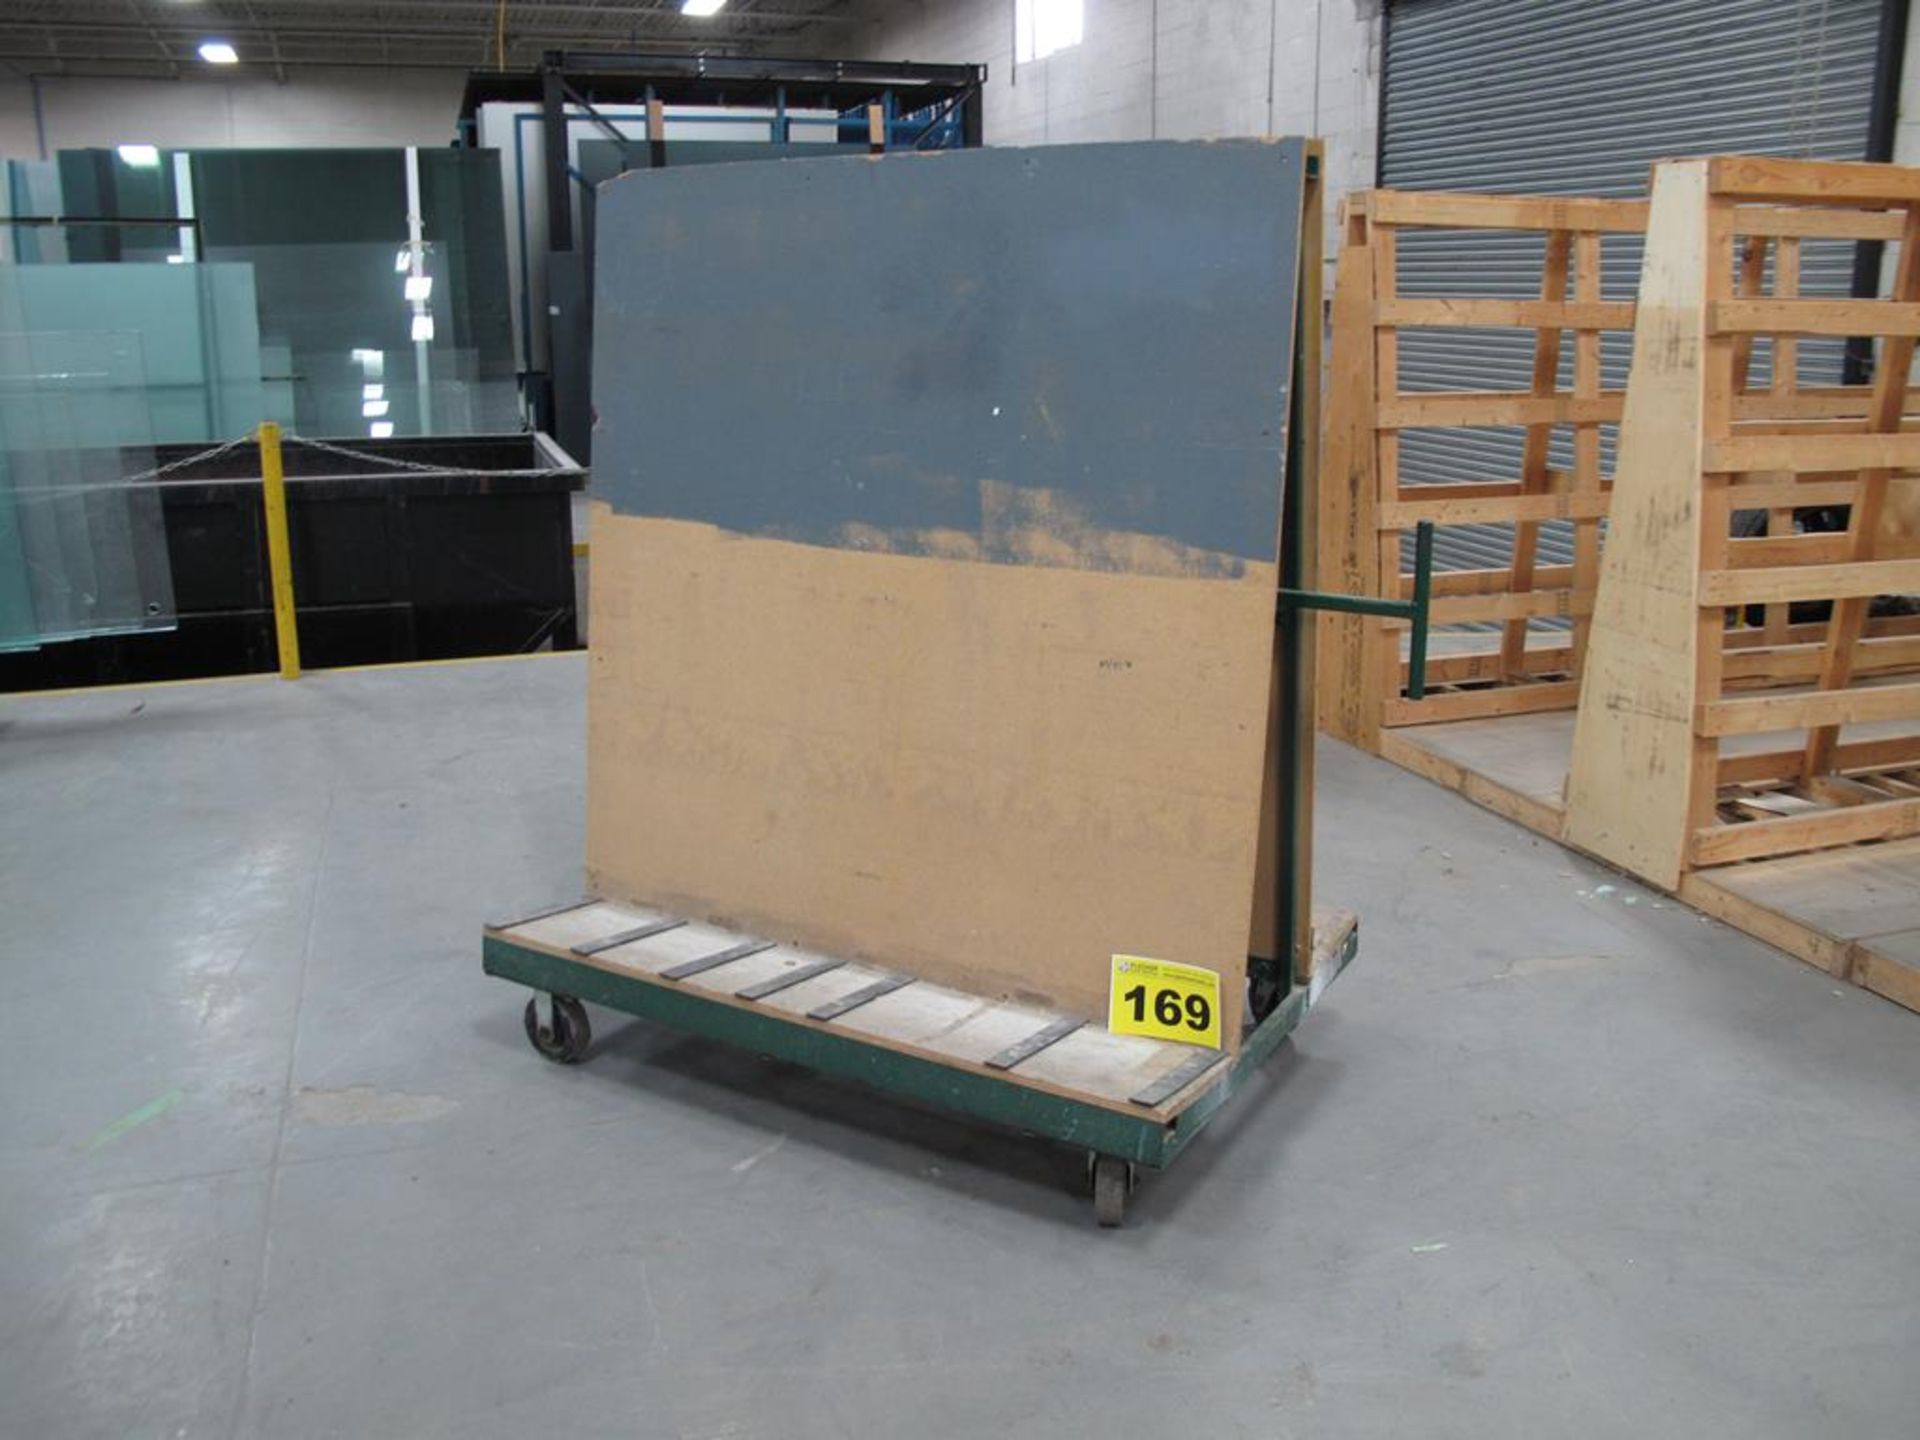 KEAR FAB, 2,000 LBS (APPROX.), 4'X 4' X 3', DOUBLE SIDED, ROLLING PRODUCTION GLASS RACK WITH FOOT